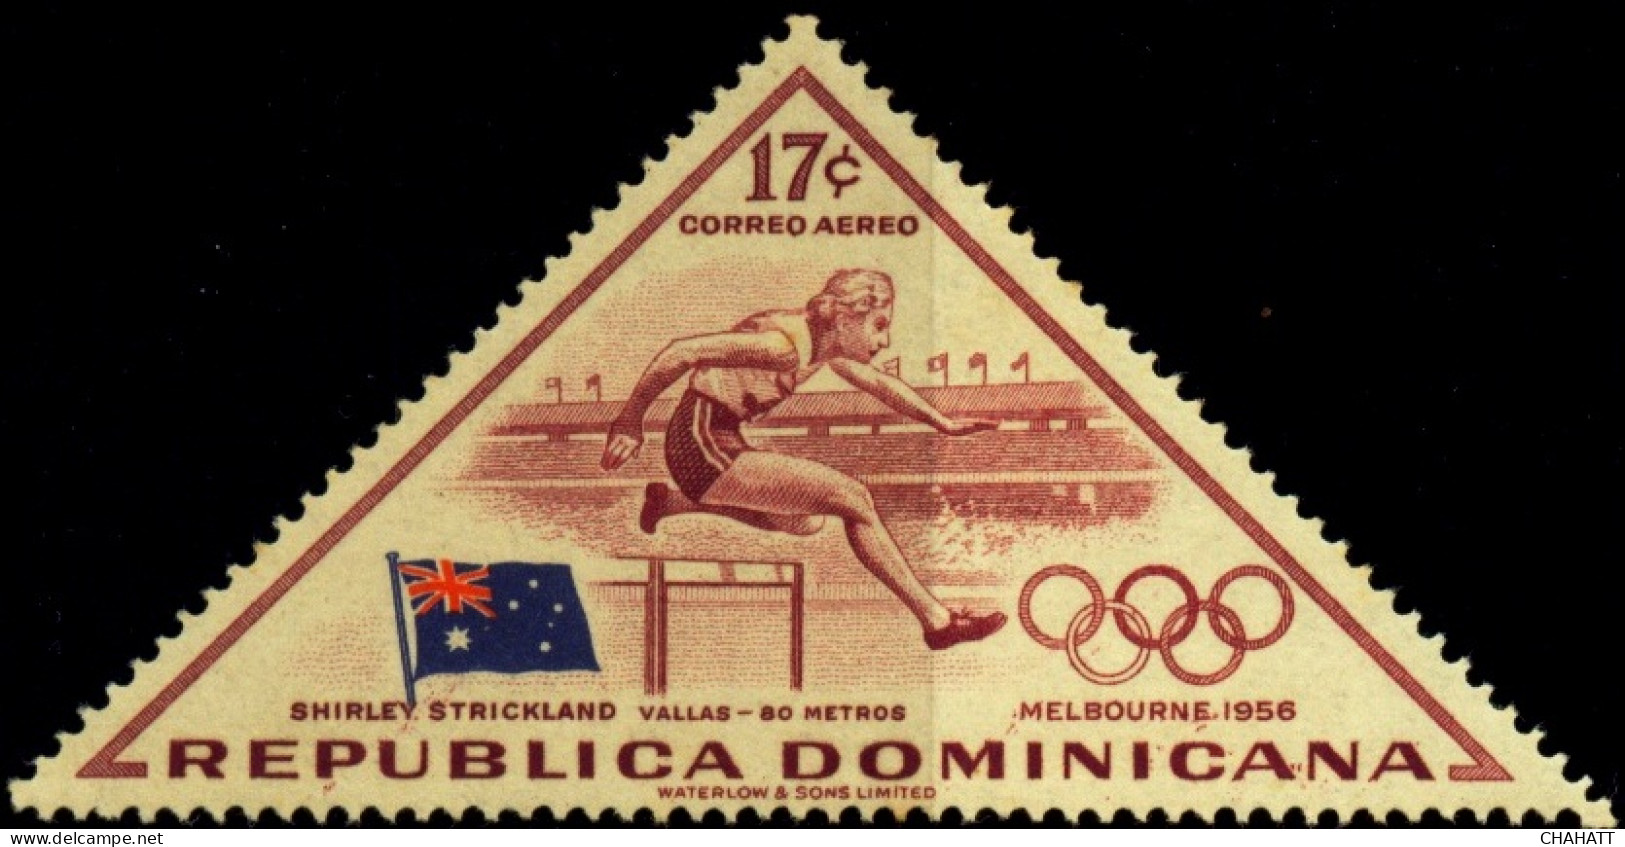 OLYMPICS-1956-MELBOURNE- ATHLETICS - ODD SHAPED -DOMINICANA-MNH-A5-108 - Sommer 1956: Melbourne